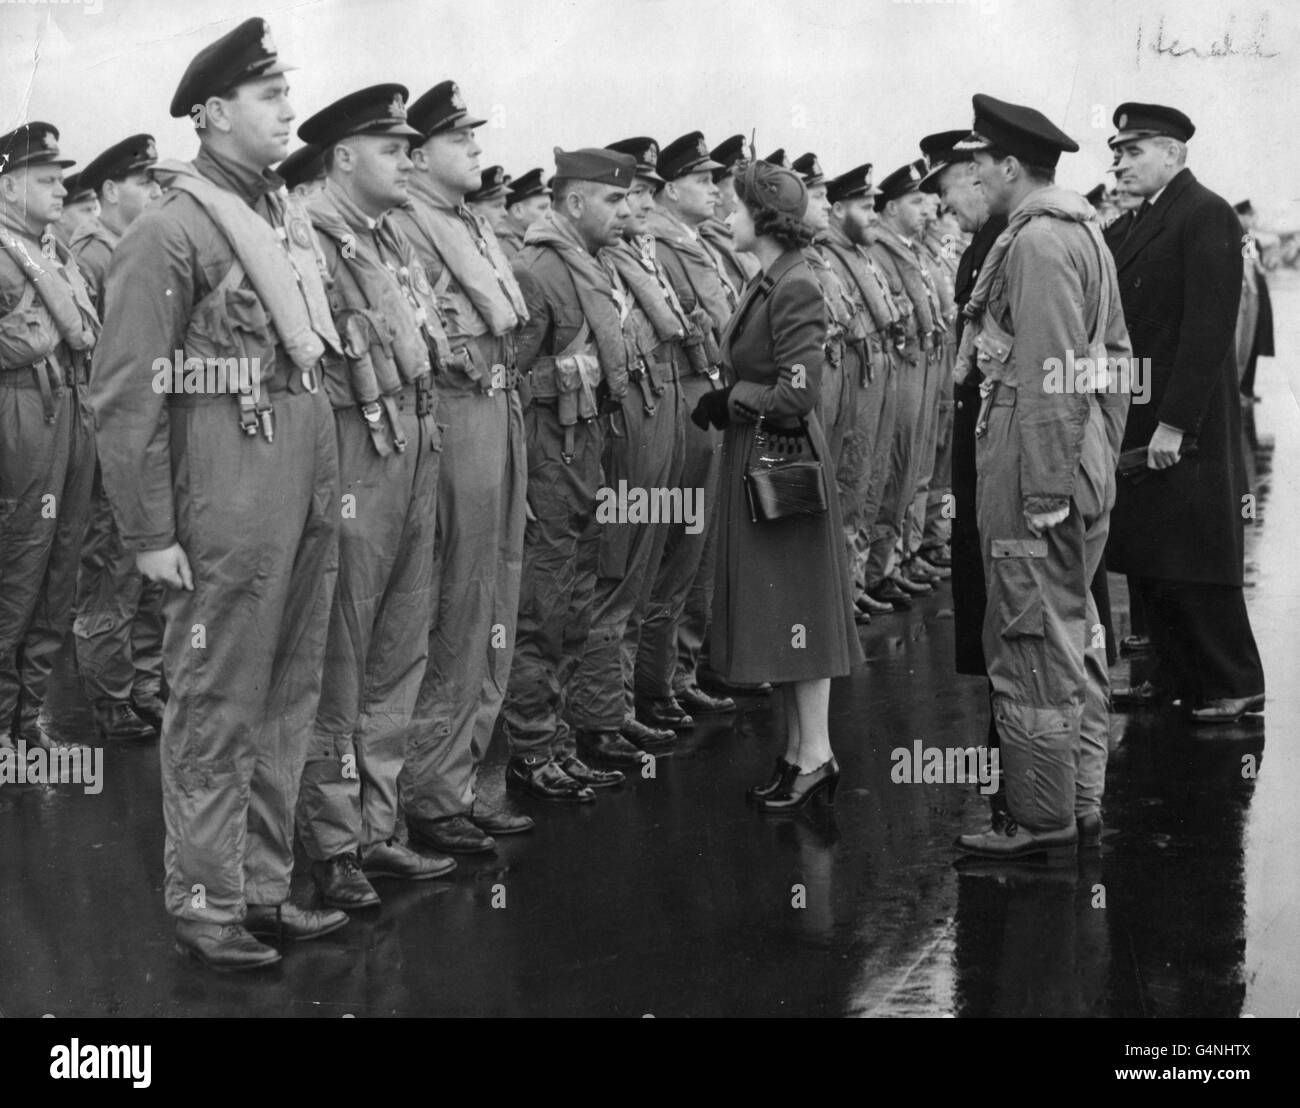 Queen Elizabeth II inspecting pilots of the Royal Navy during her first visit to a naval establishment since her Accession, when she visited the Royal Navy's Home Air Command. Stock Photo